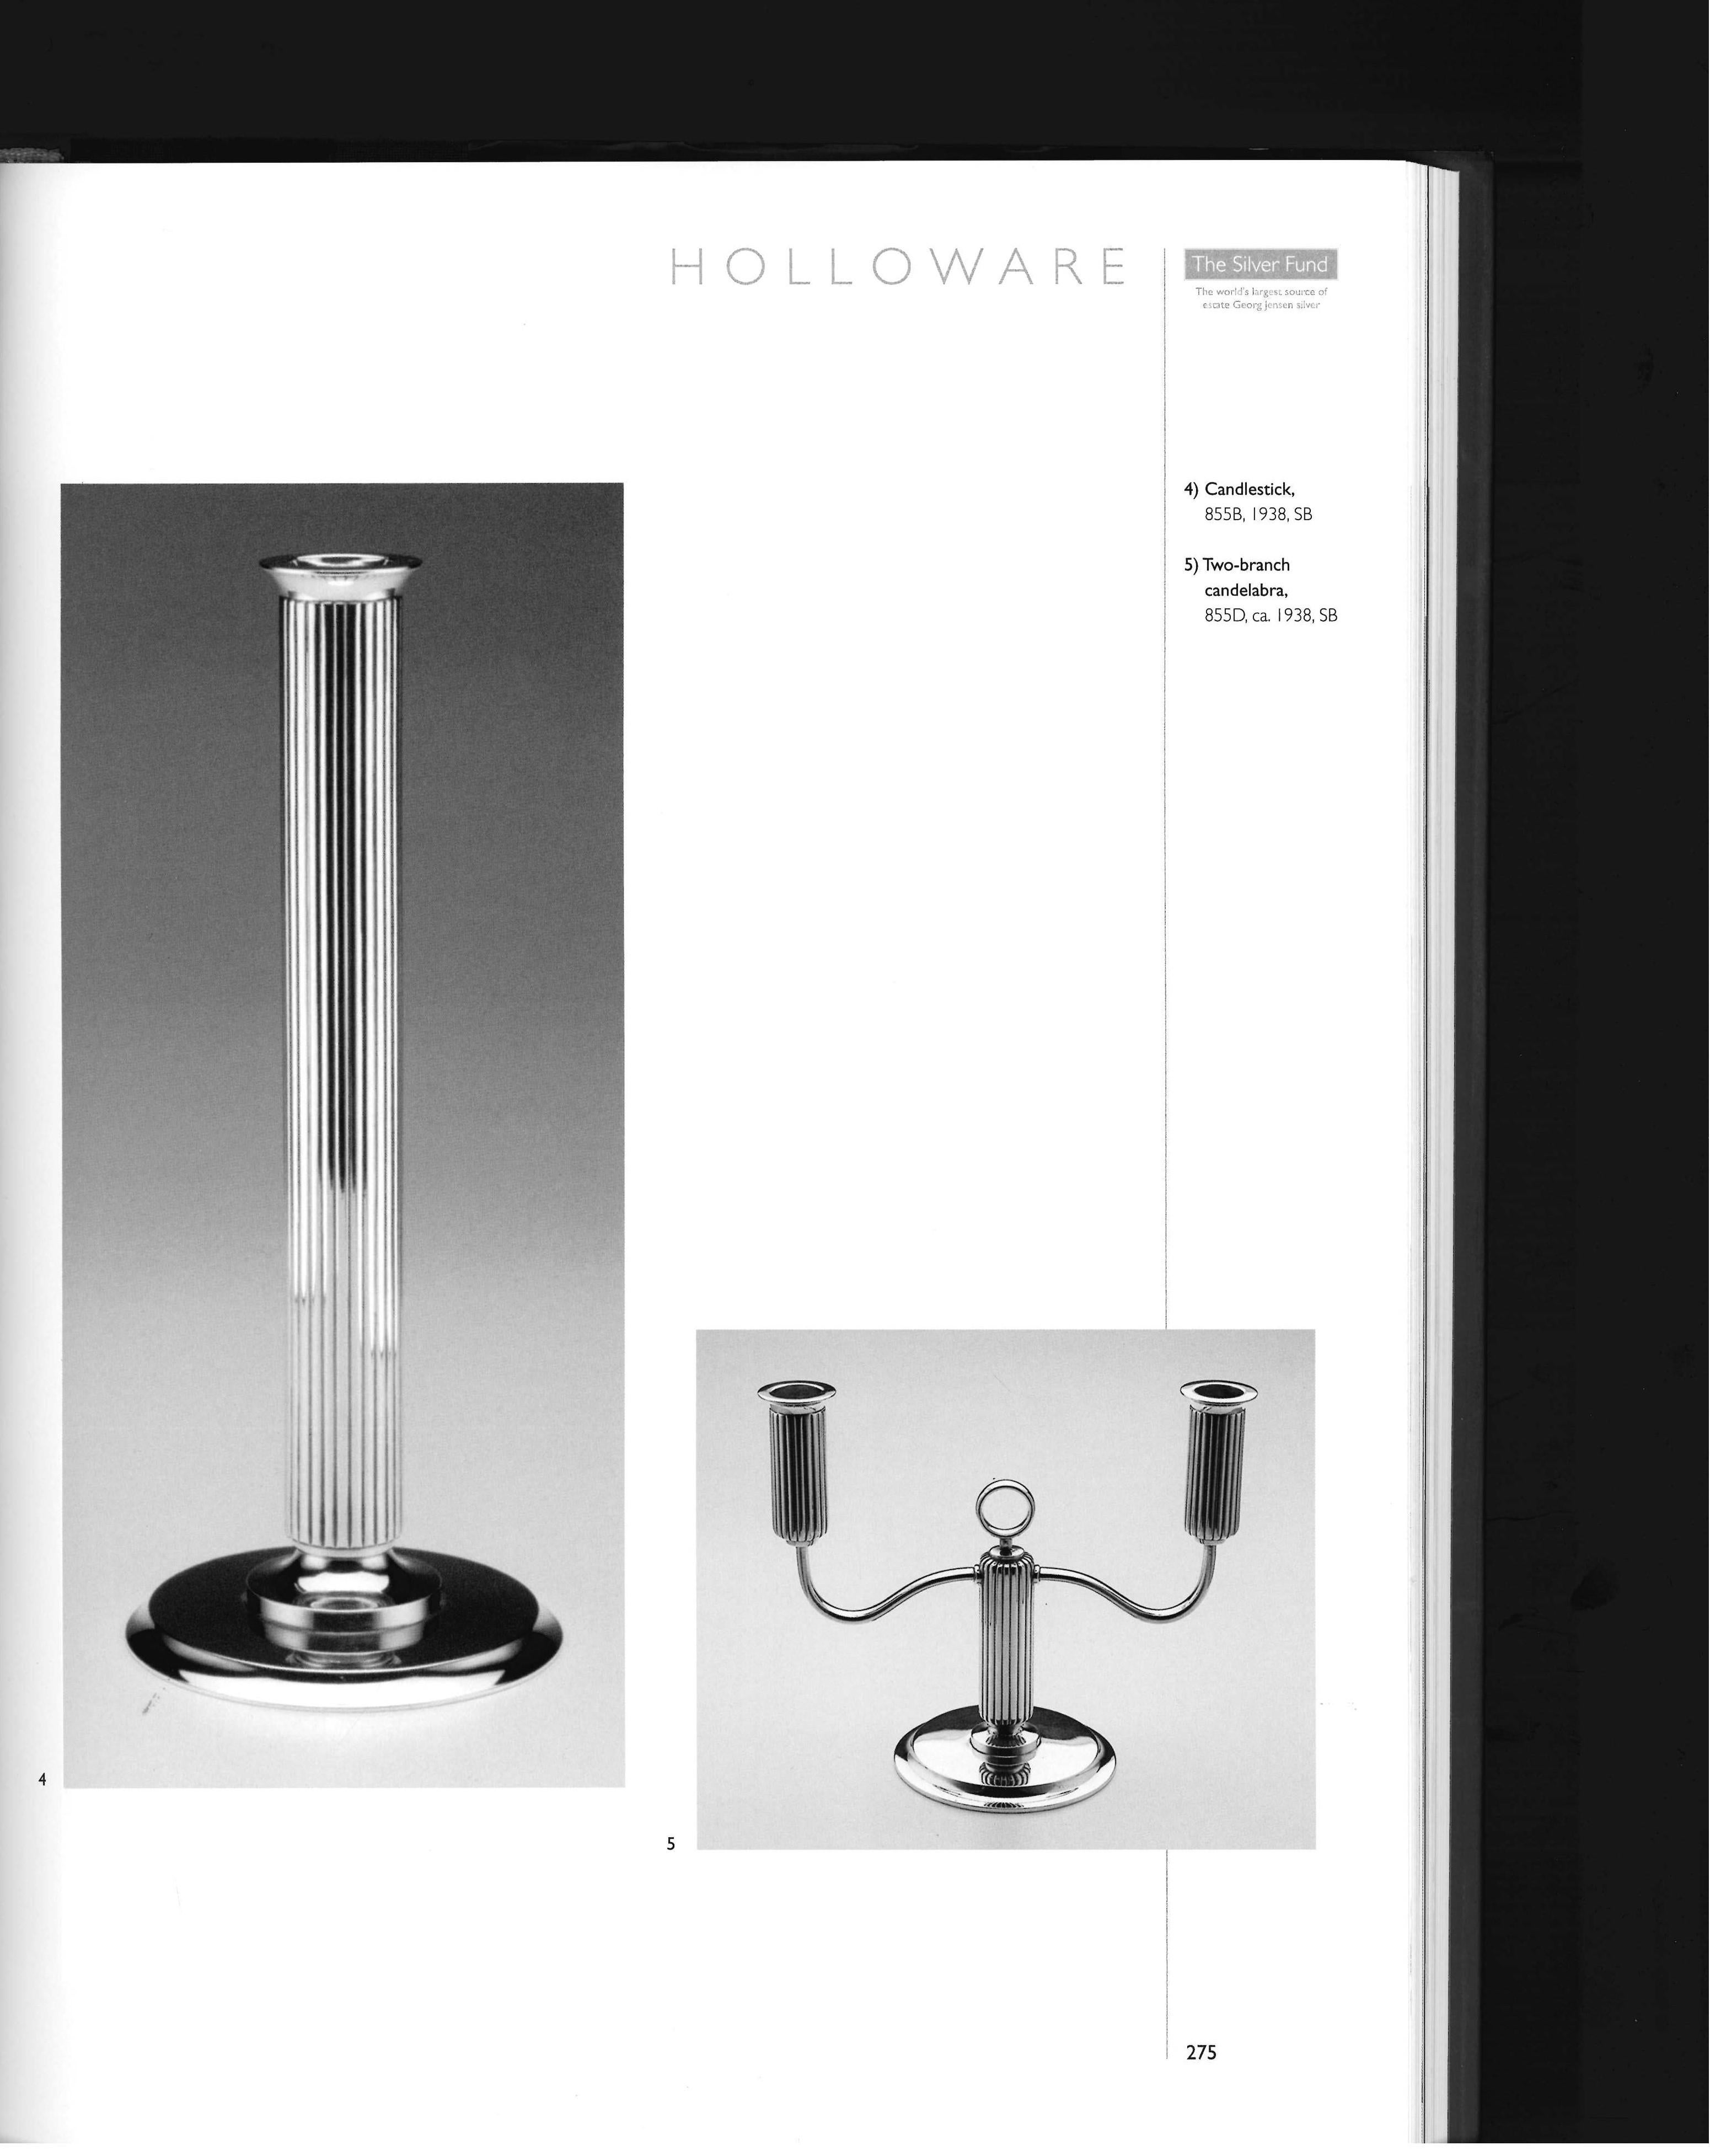 Georg Jensen: Holloware The Silver Fund Collection Book) For Sale 1